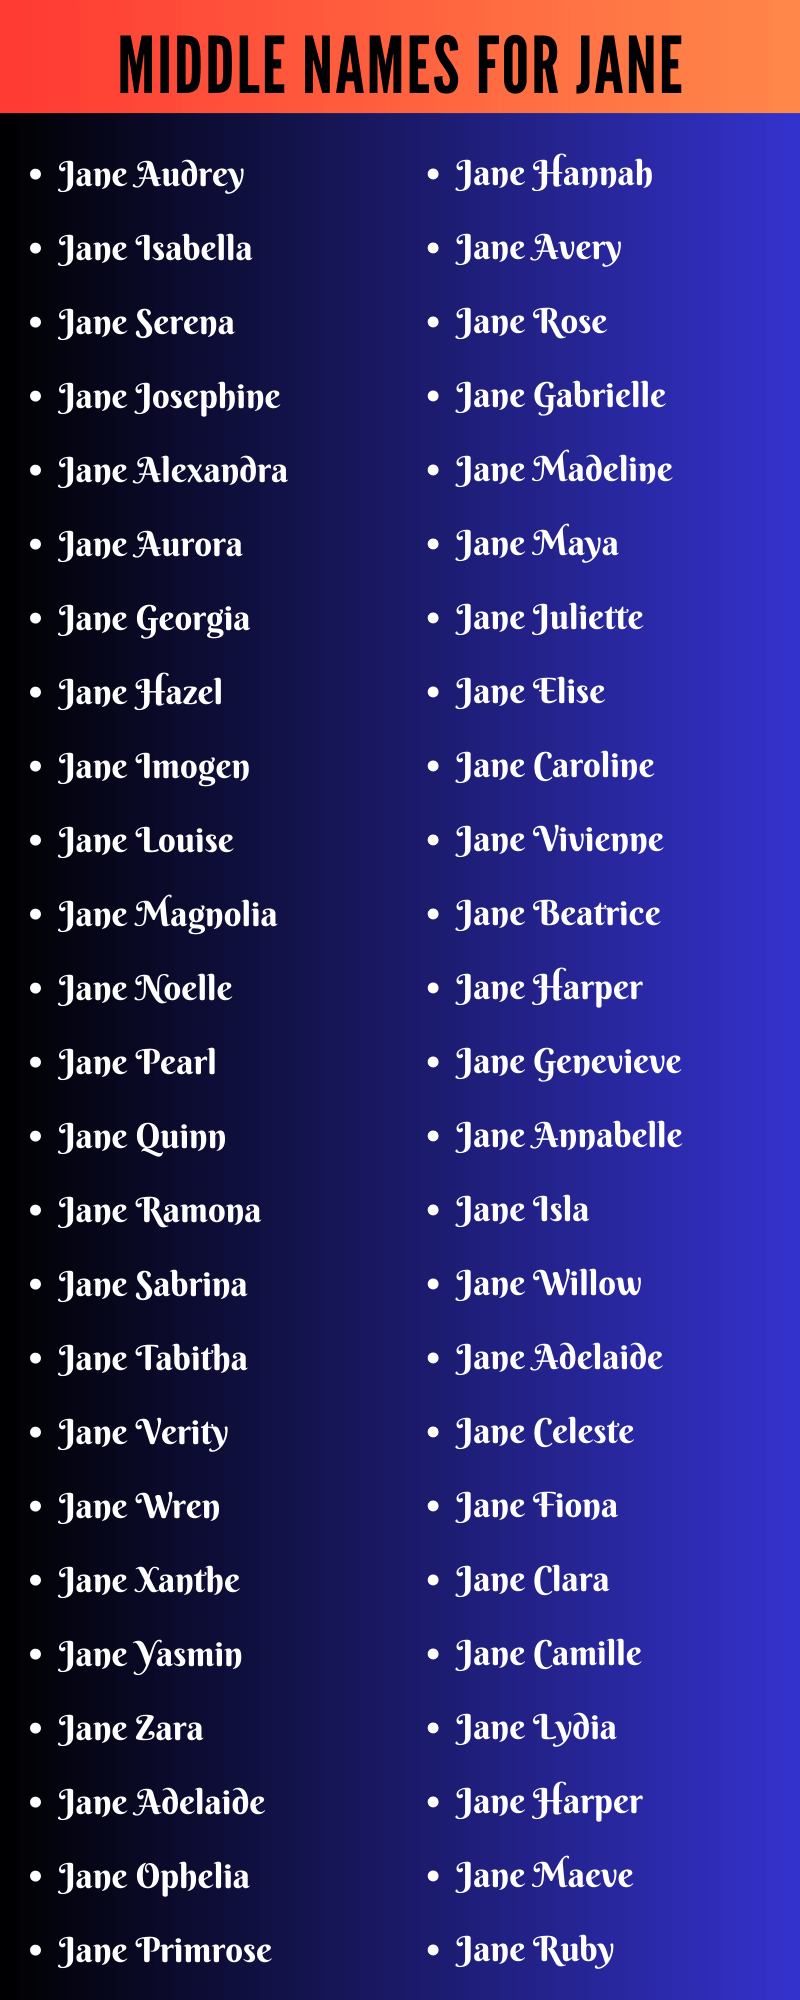 Middle Names For Jane